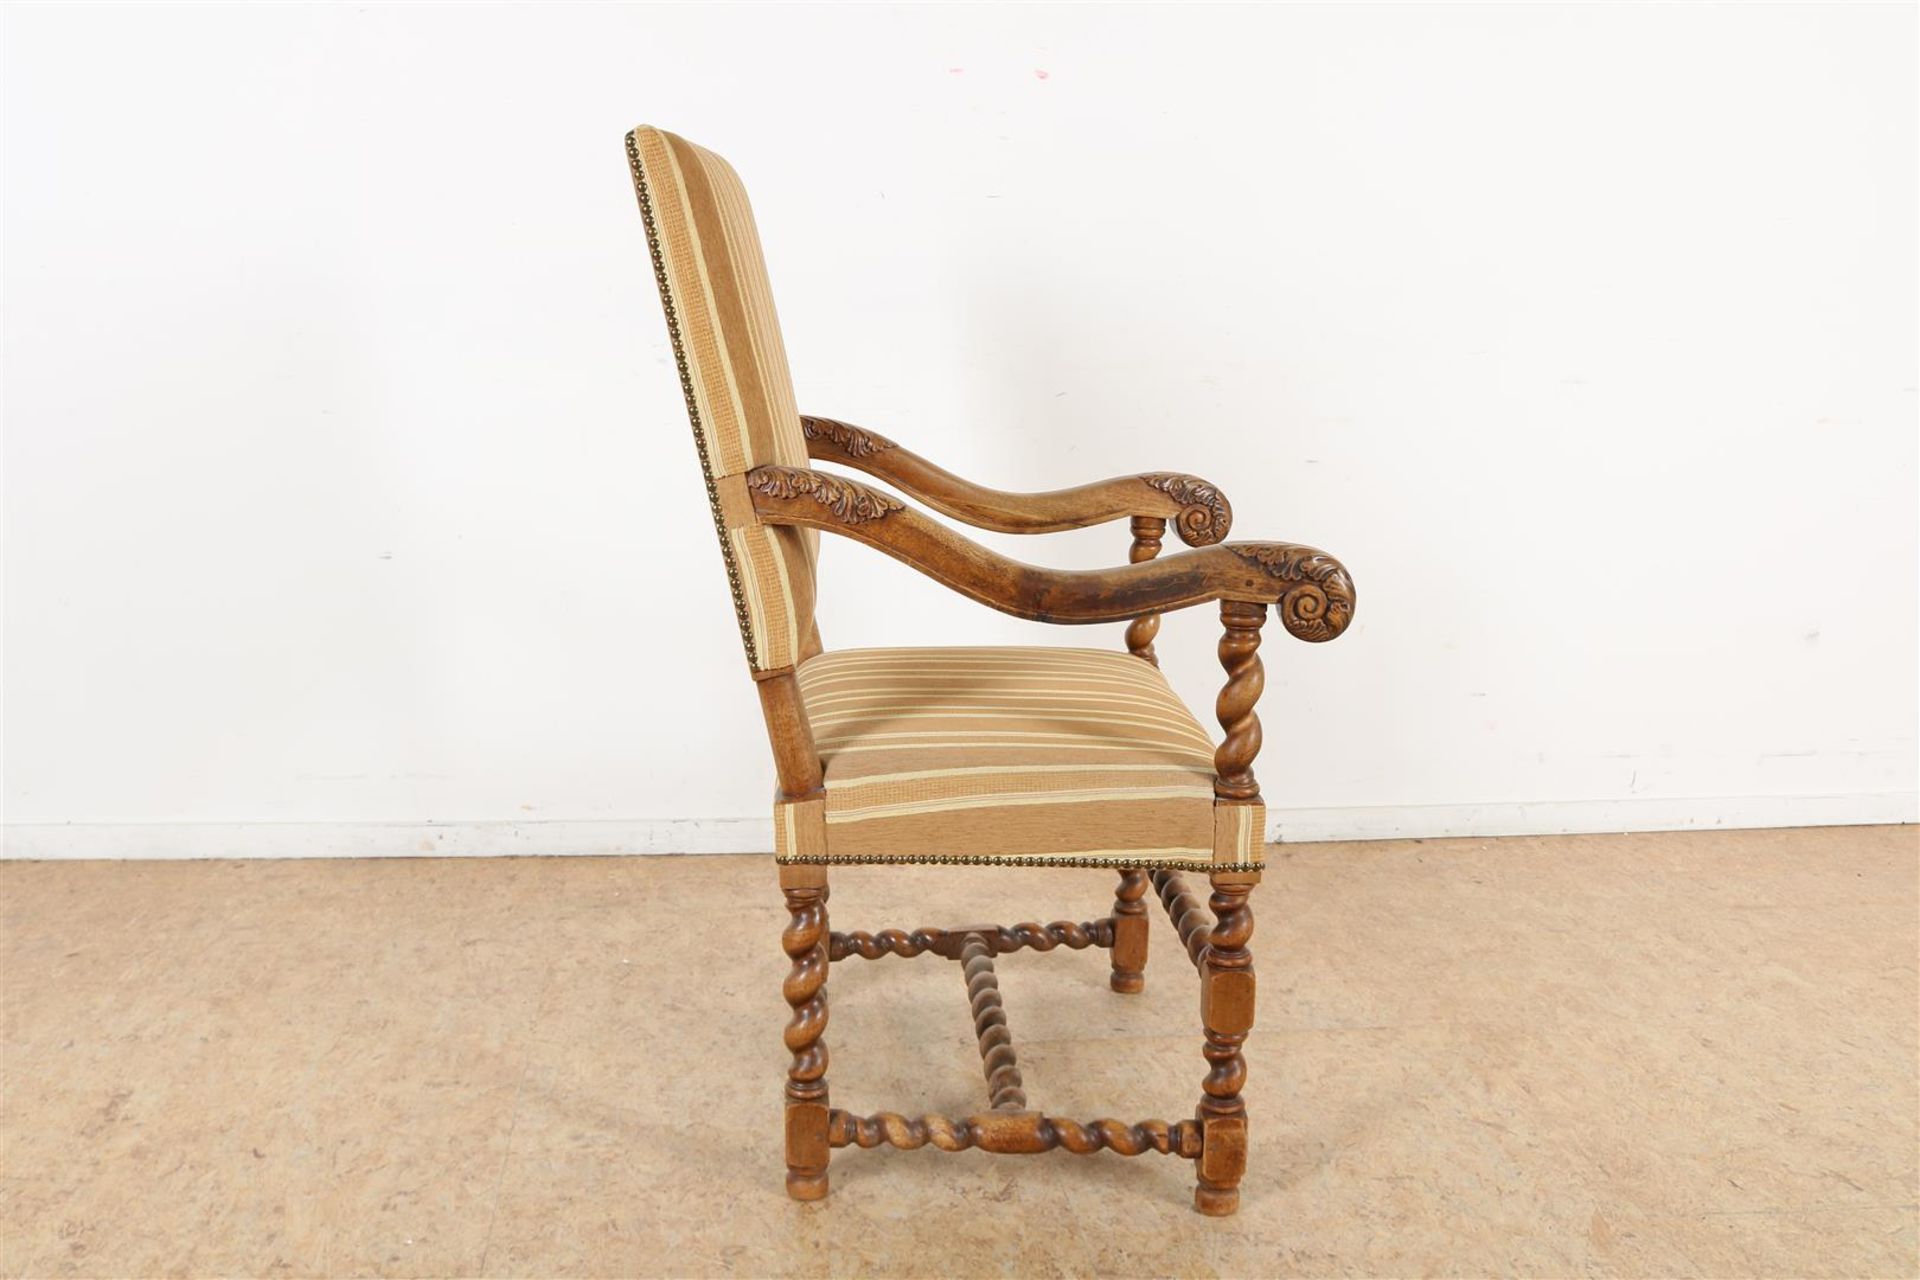 Walnut armchair with striped upholstery and carved acanthus leaves on the armrest. - Image 5 of 5